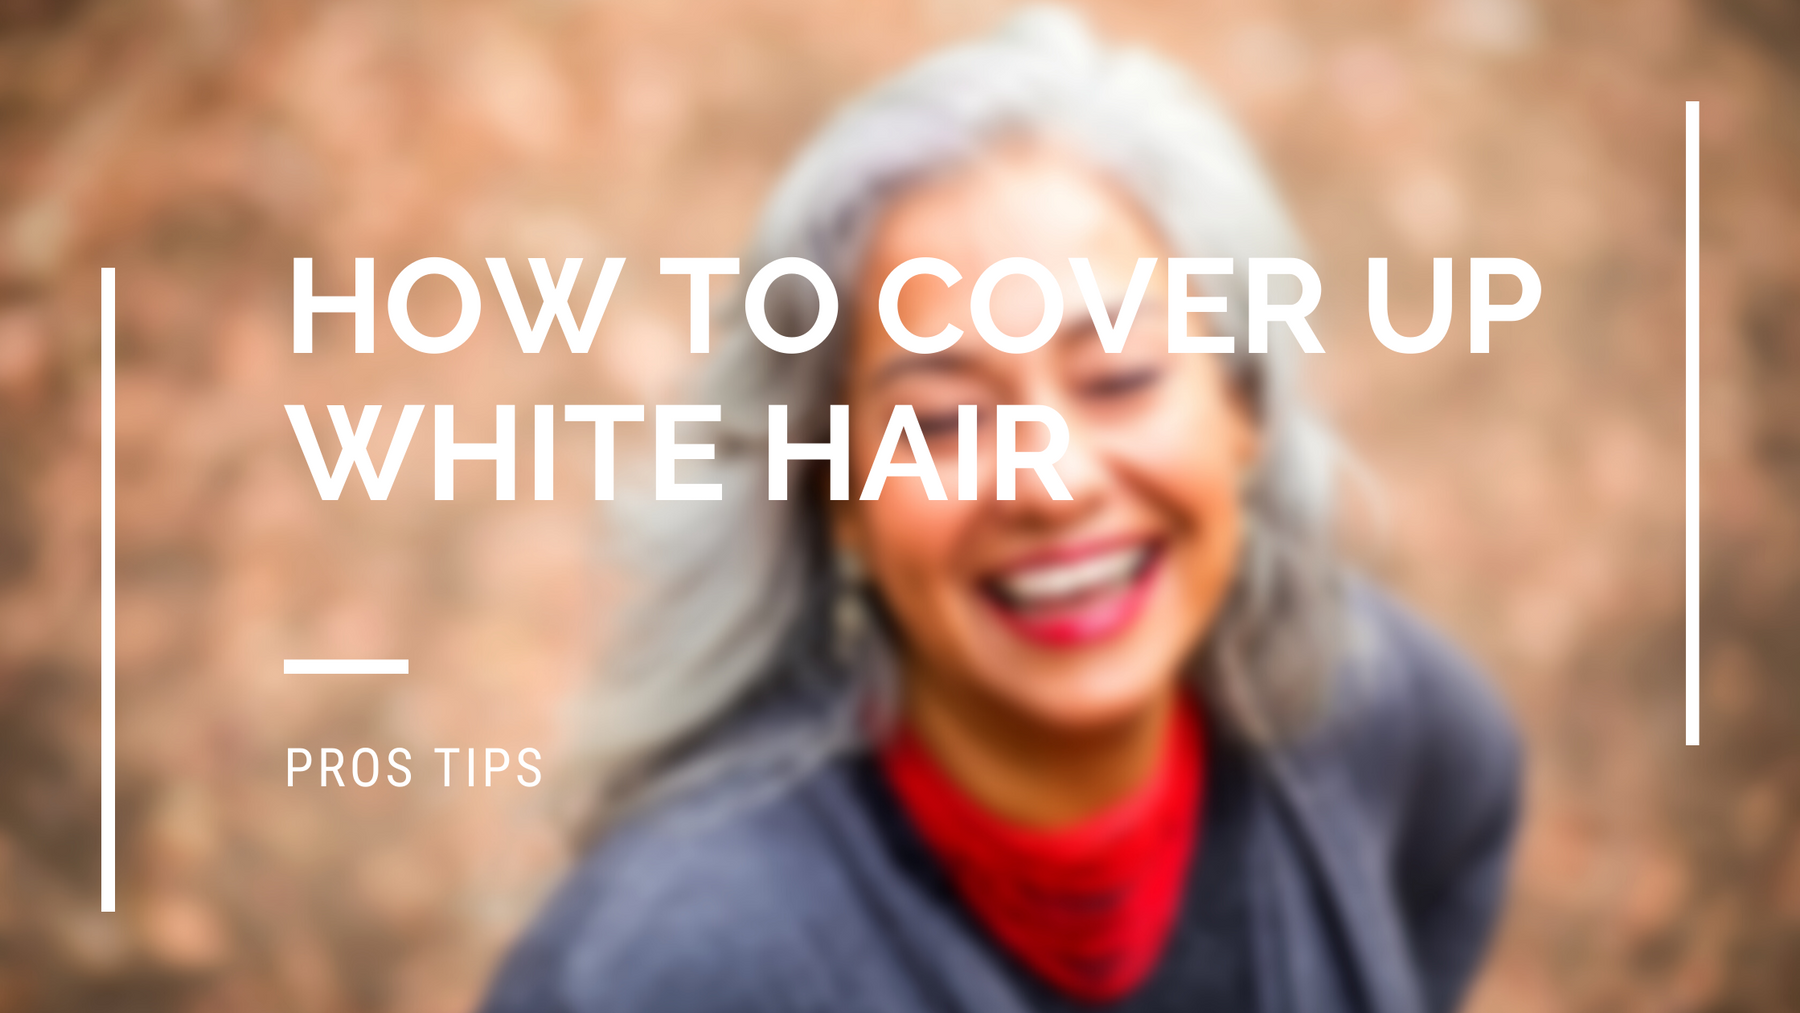 Covering white hair: our pros tips